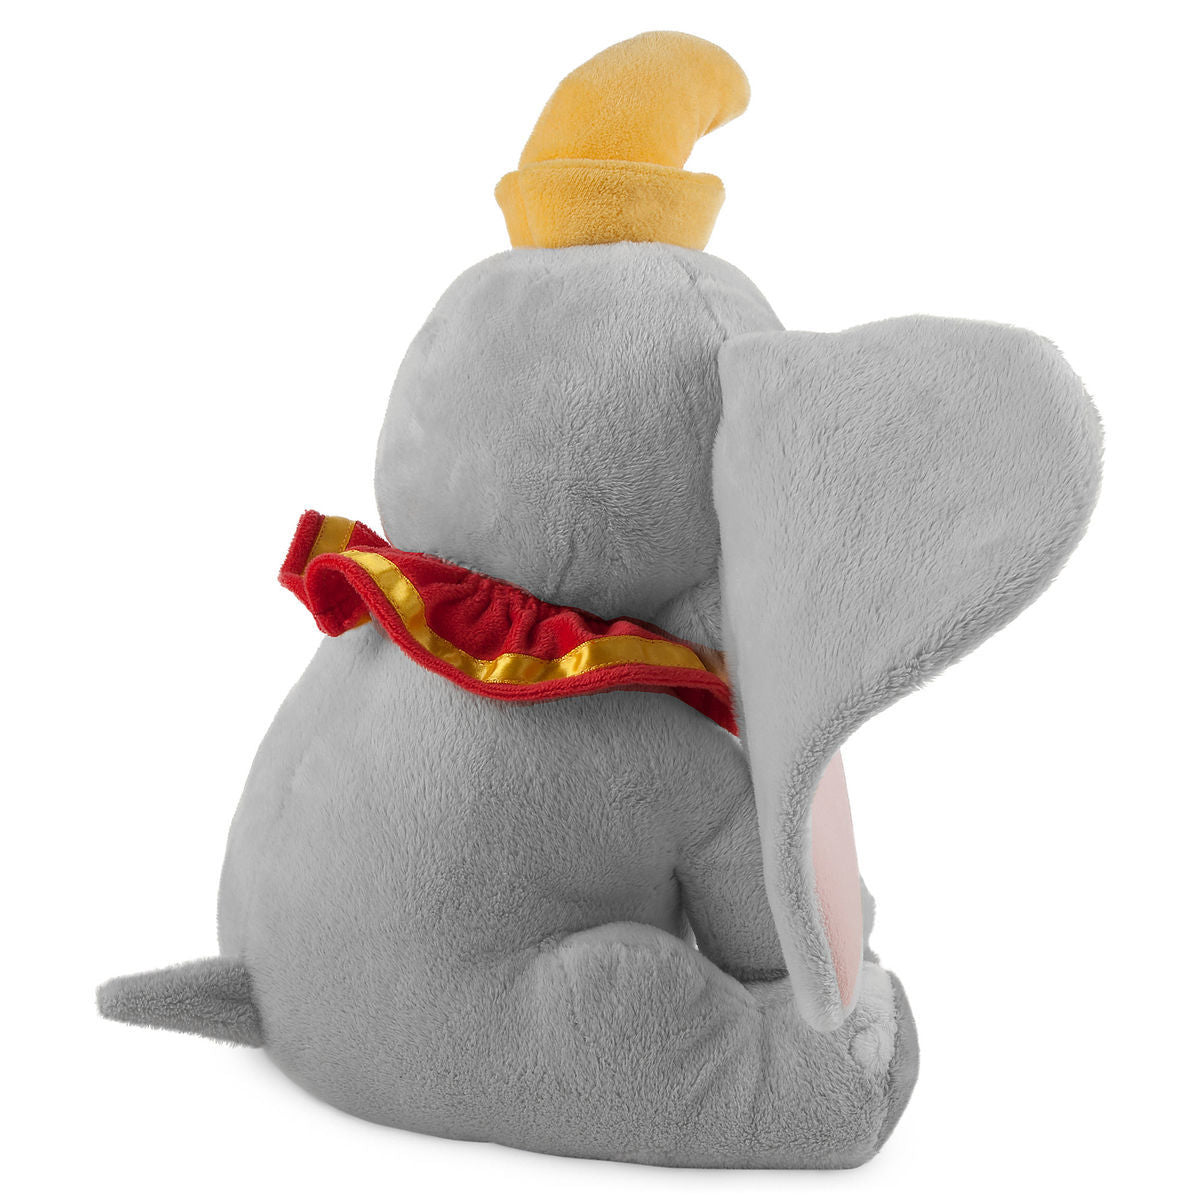 Disney Store Dumbo The Flying Elephant 12" Plush Toy New With Tag